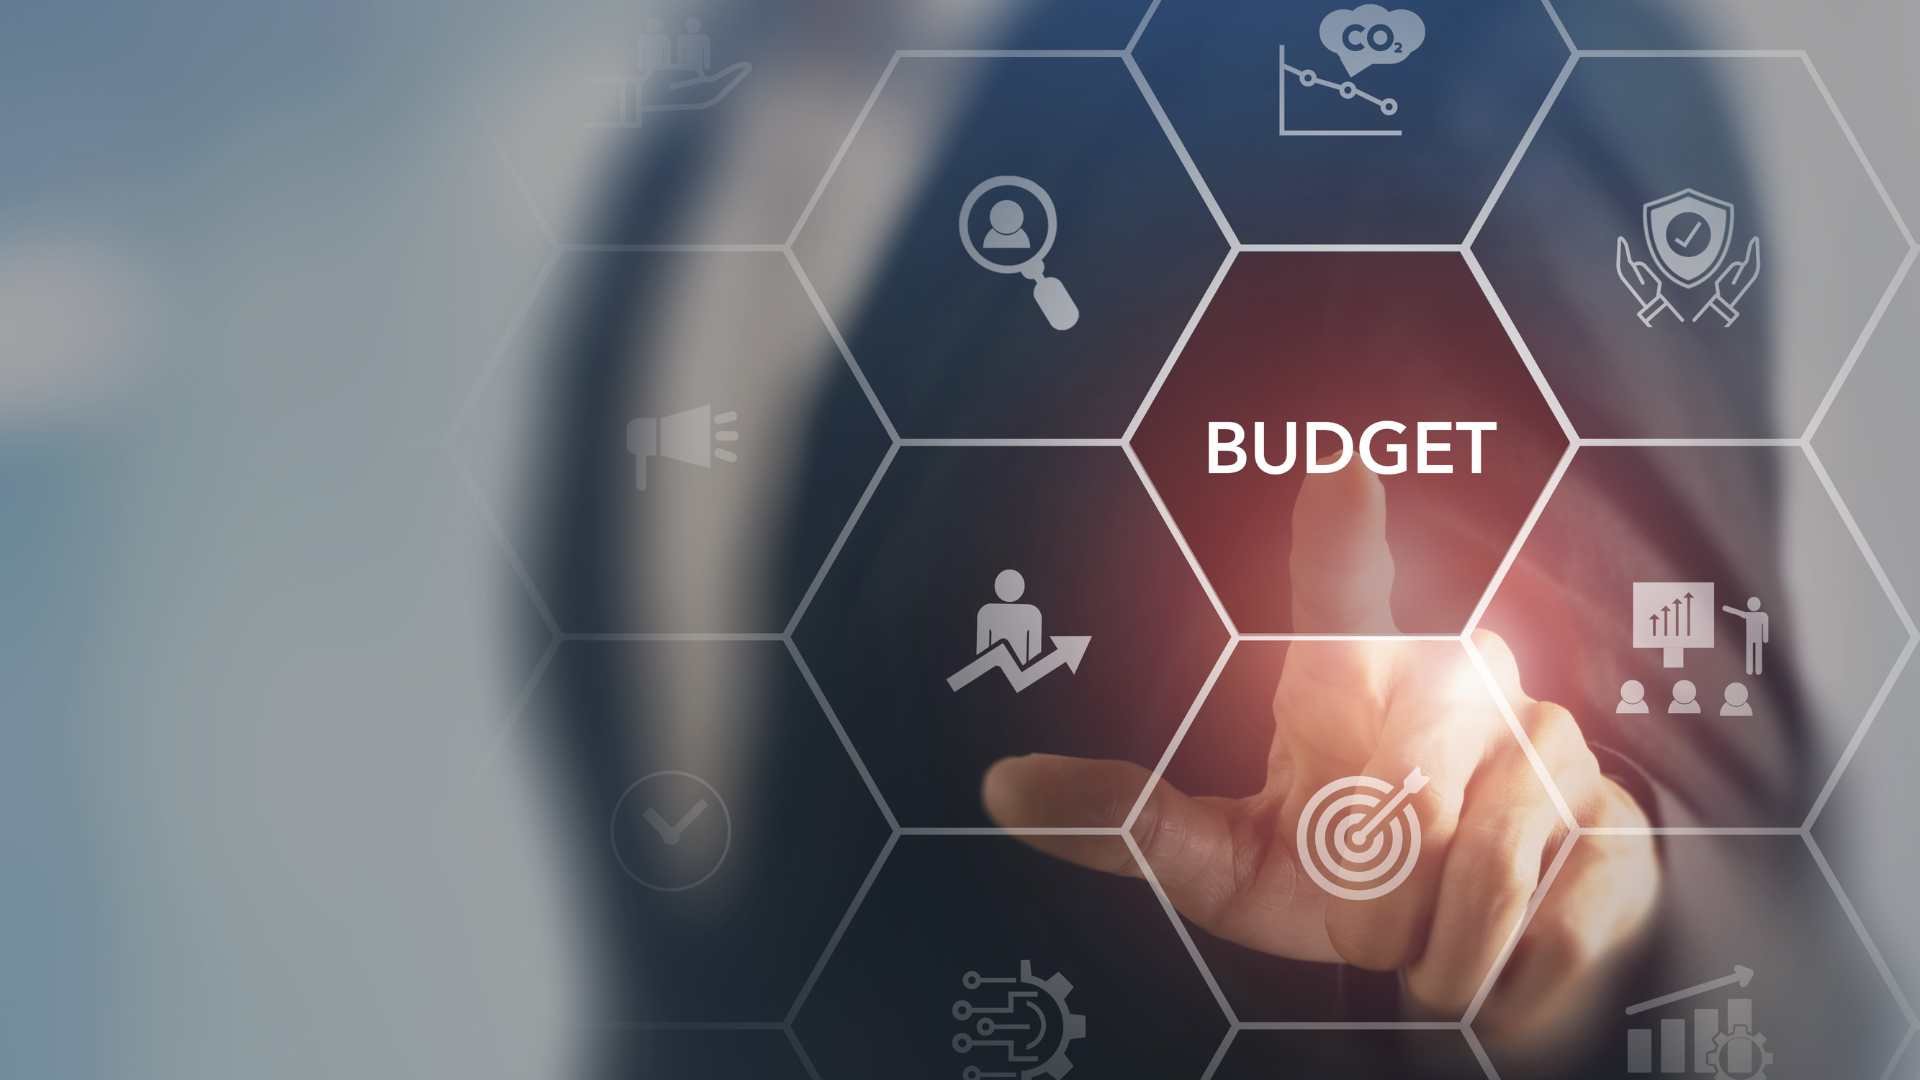 compliance training software to tackle shrinking budgets